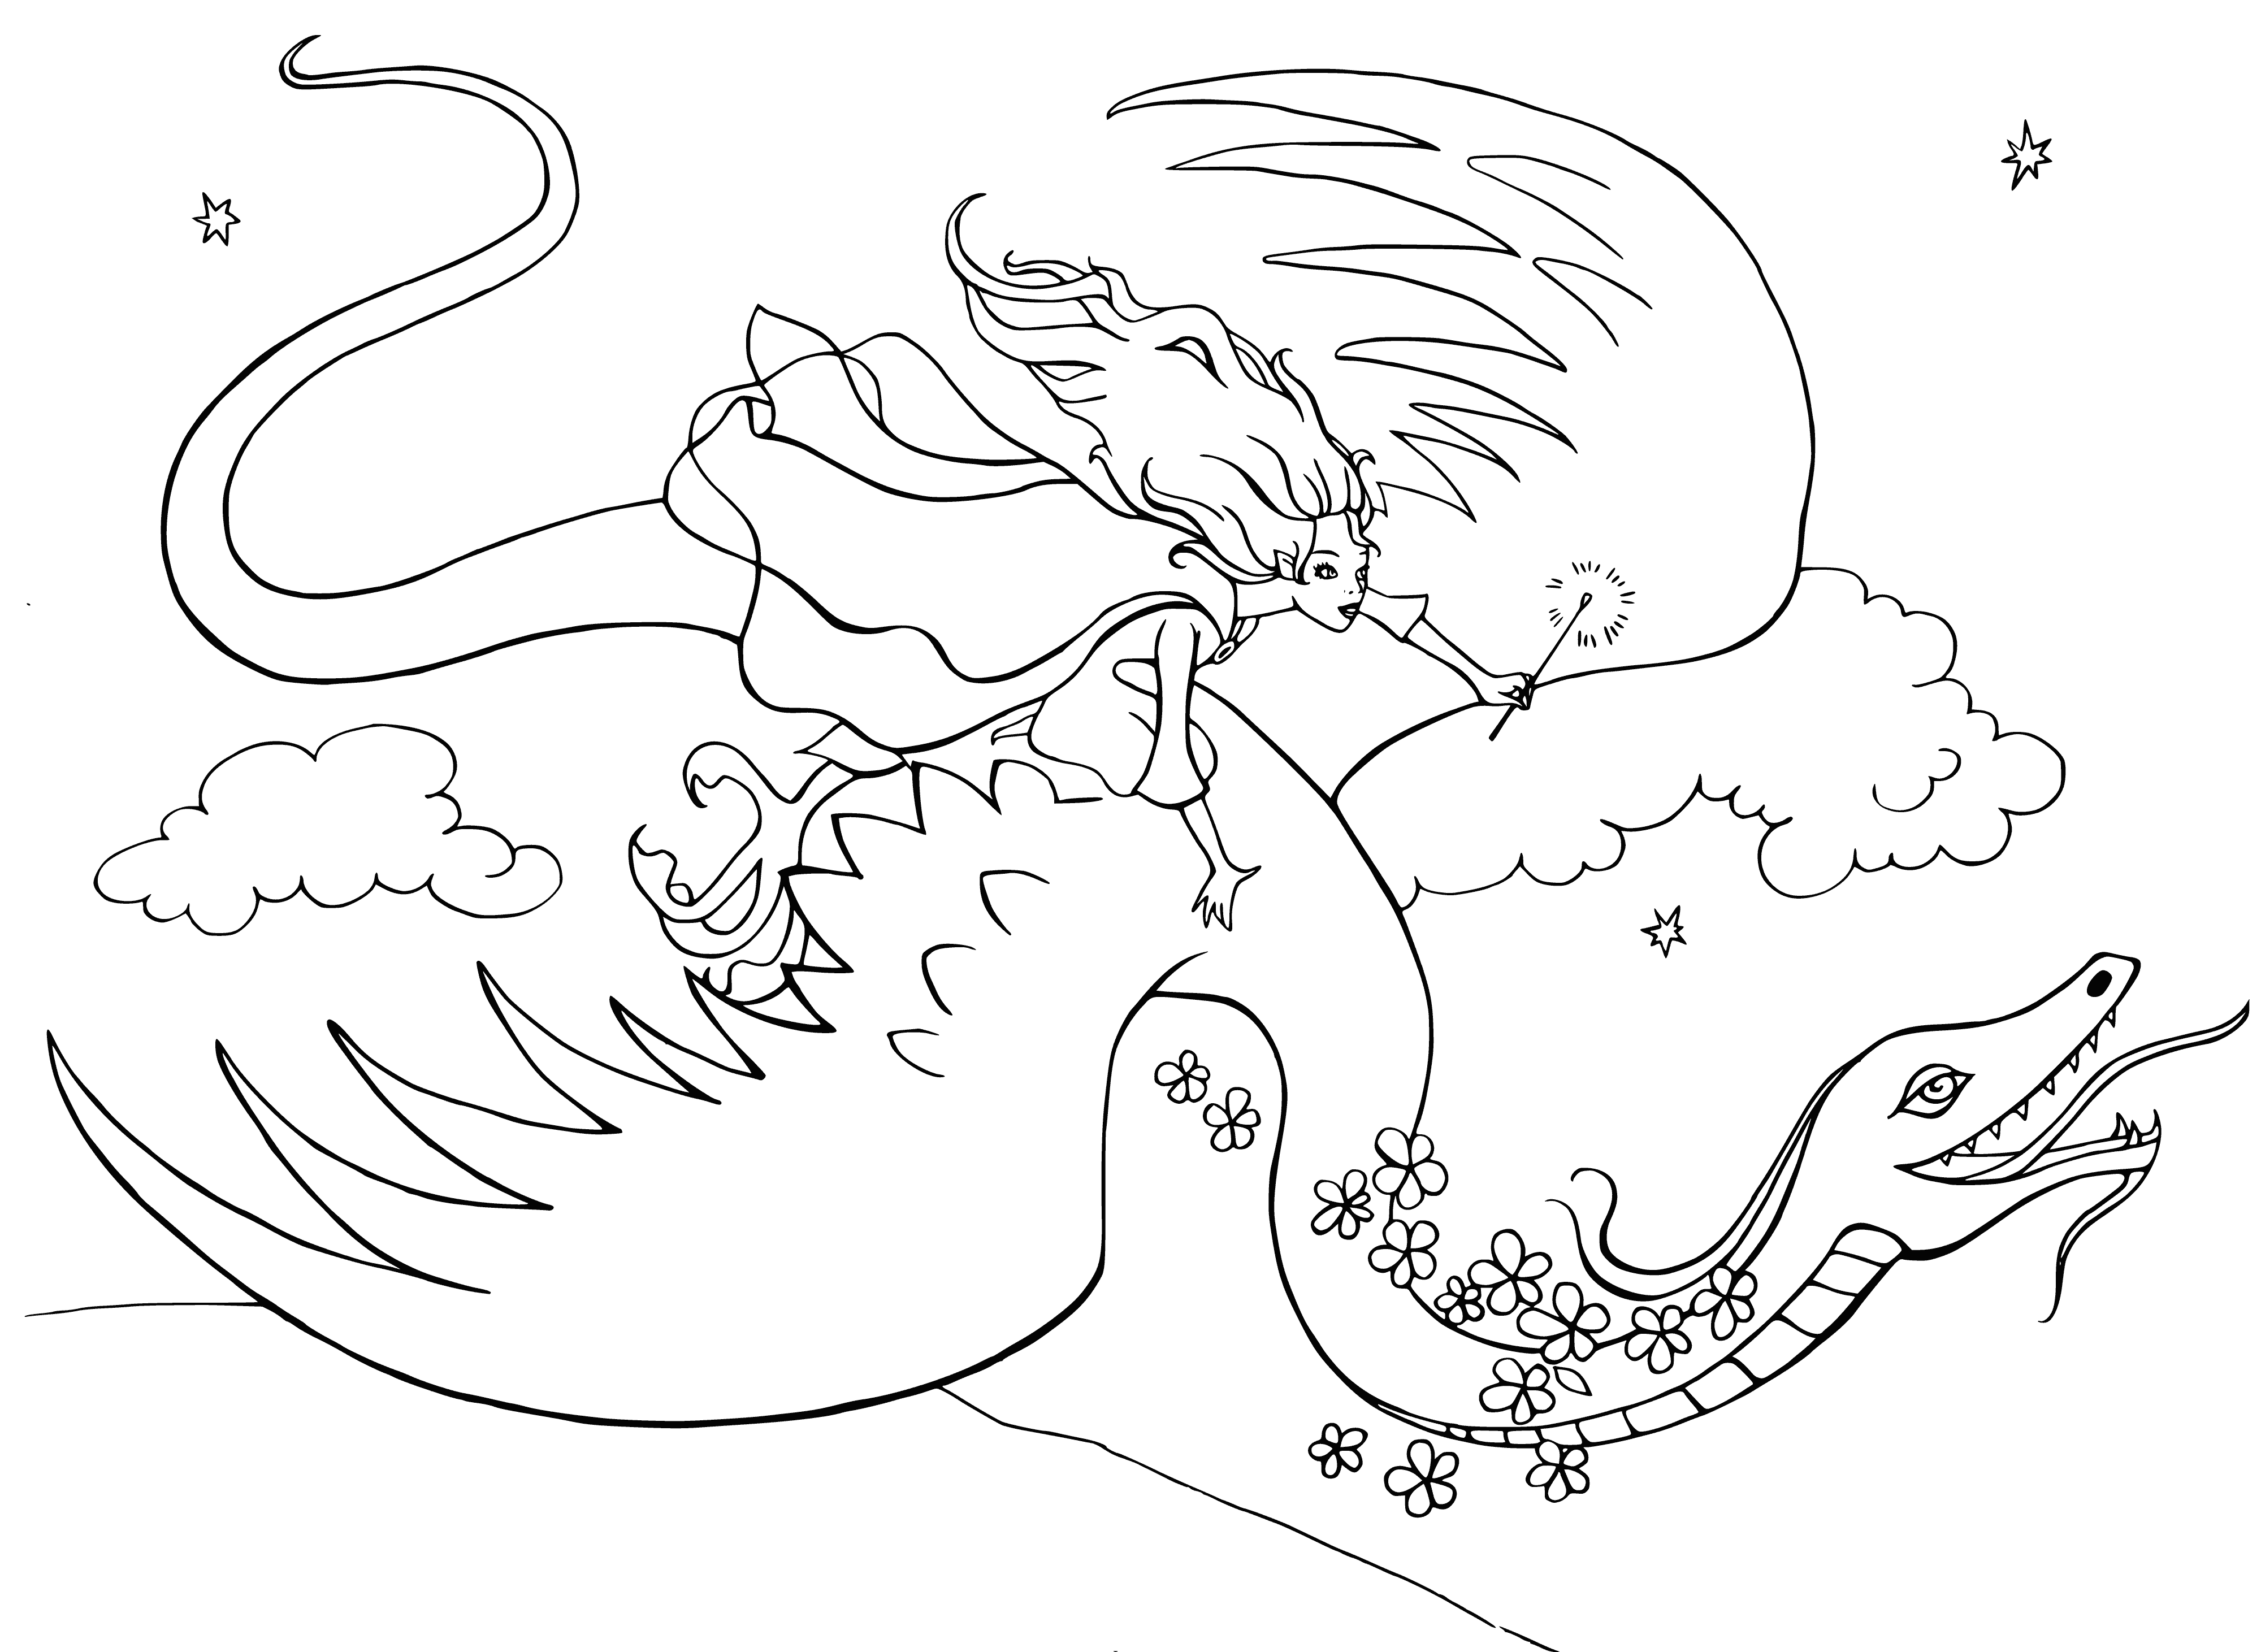 Riding a dragon coloring page